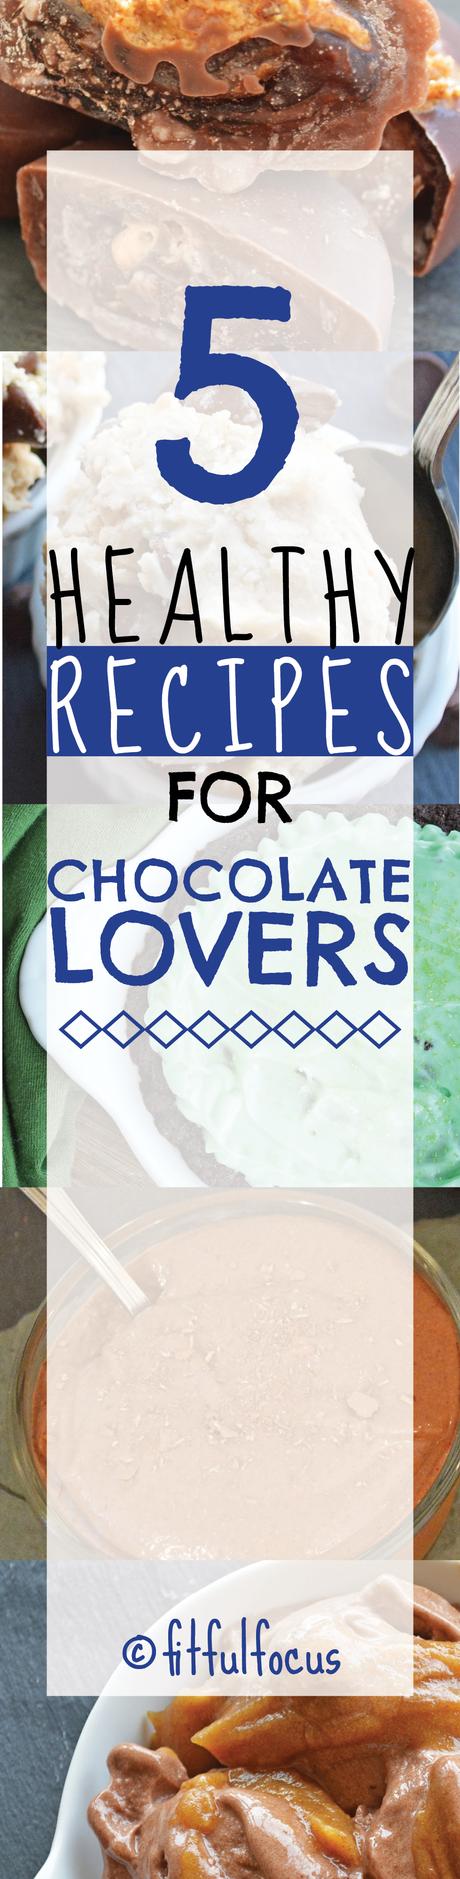 5 Healthy Recipes for Chocolate Lovers